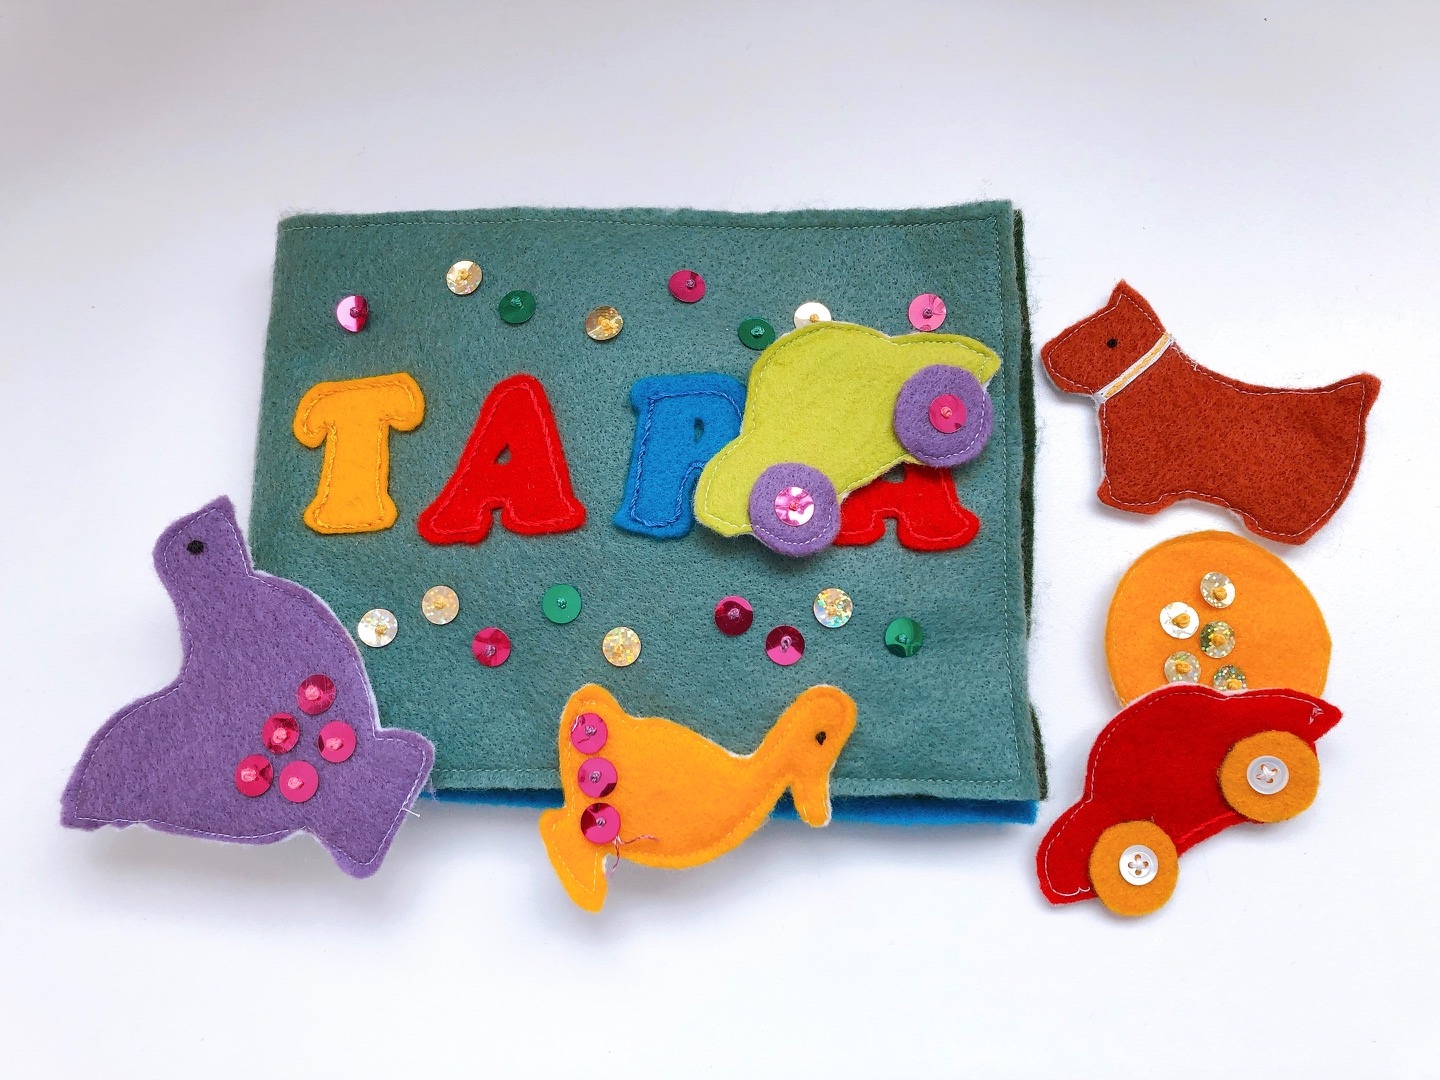 Stitch a book of felt; make animal shapes in felt from cookie cutters; attach with velcro.